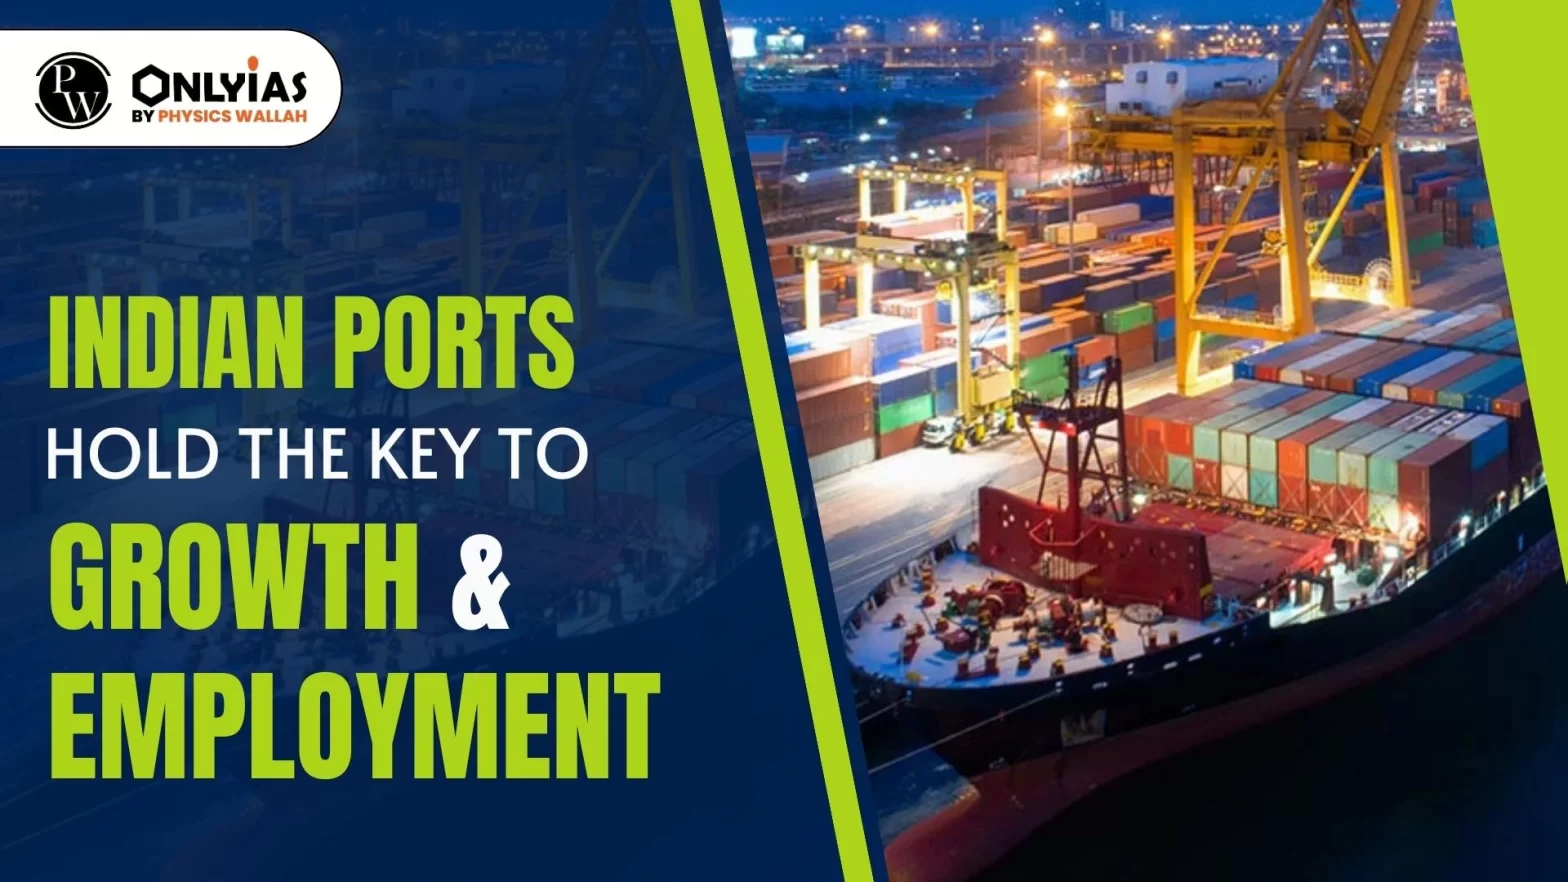 Indian Ports Hold the Key to Growth & Employment